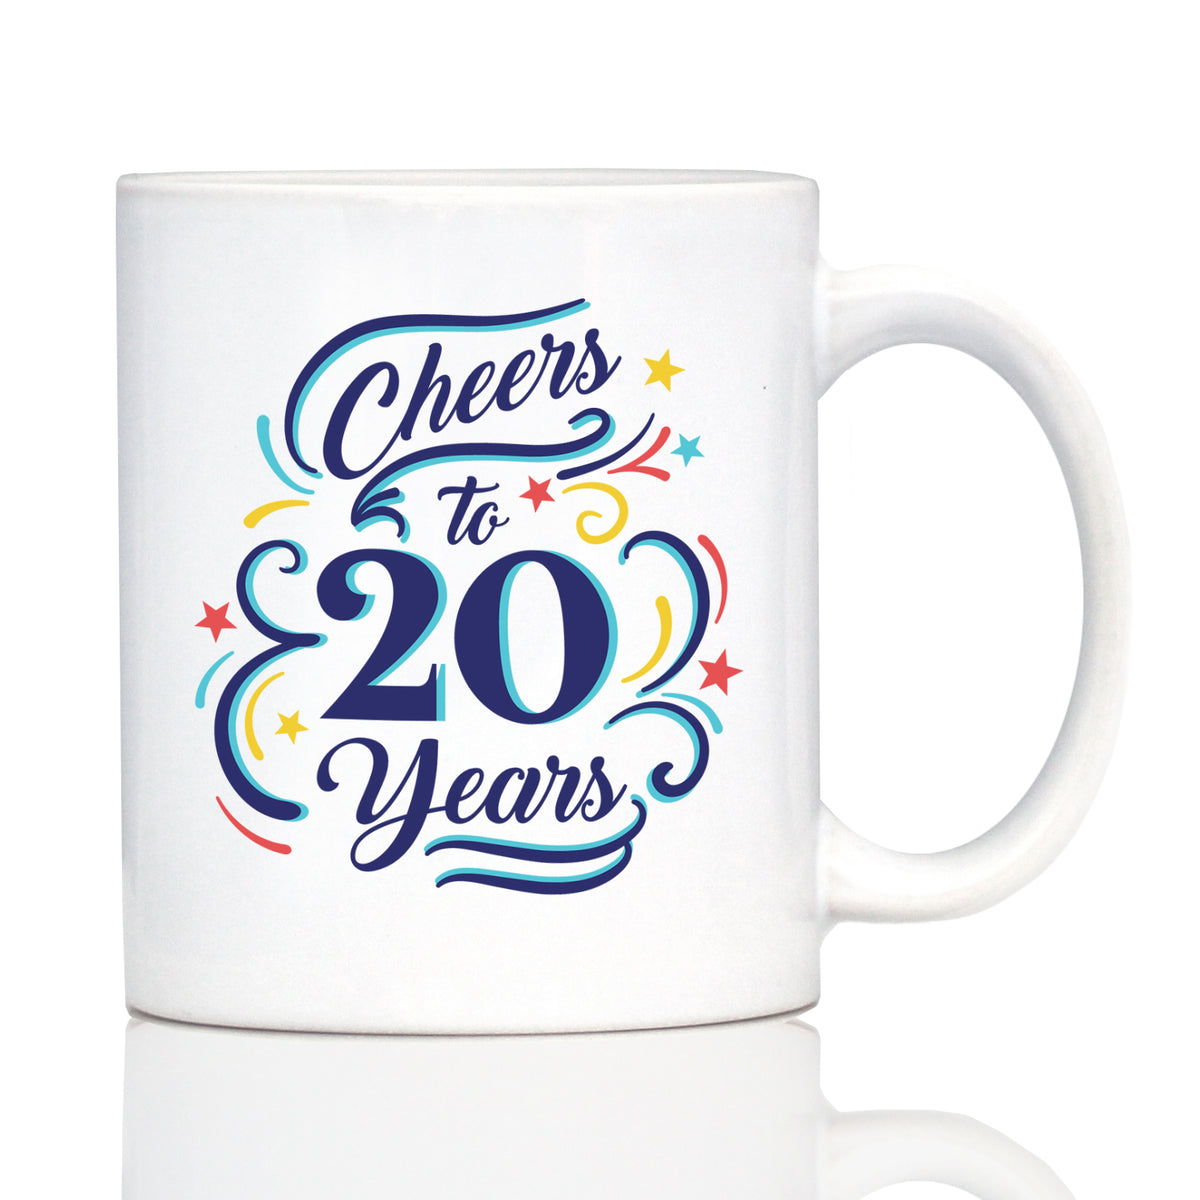 Cheers to 20 Years - Coffee Mug Gifts for Women &amp; Men - 20th Anniversary Party Decor